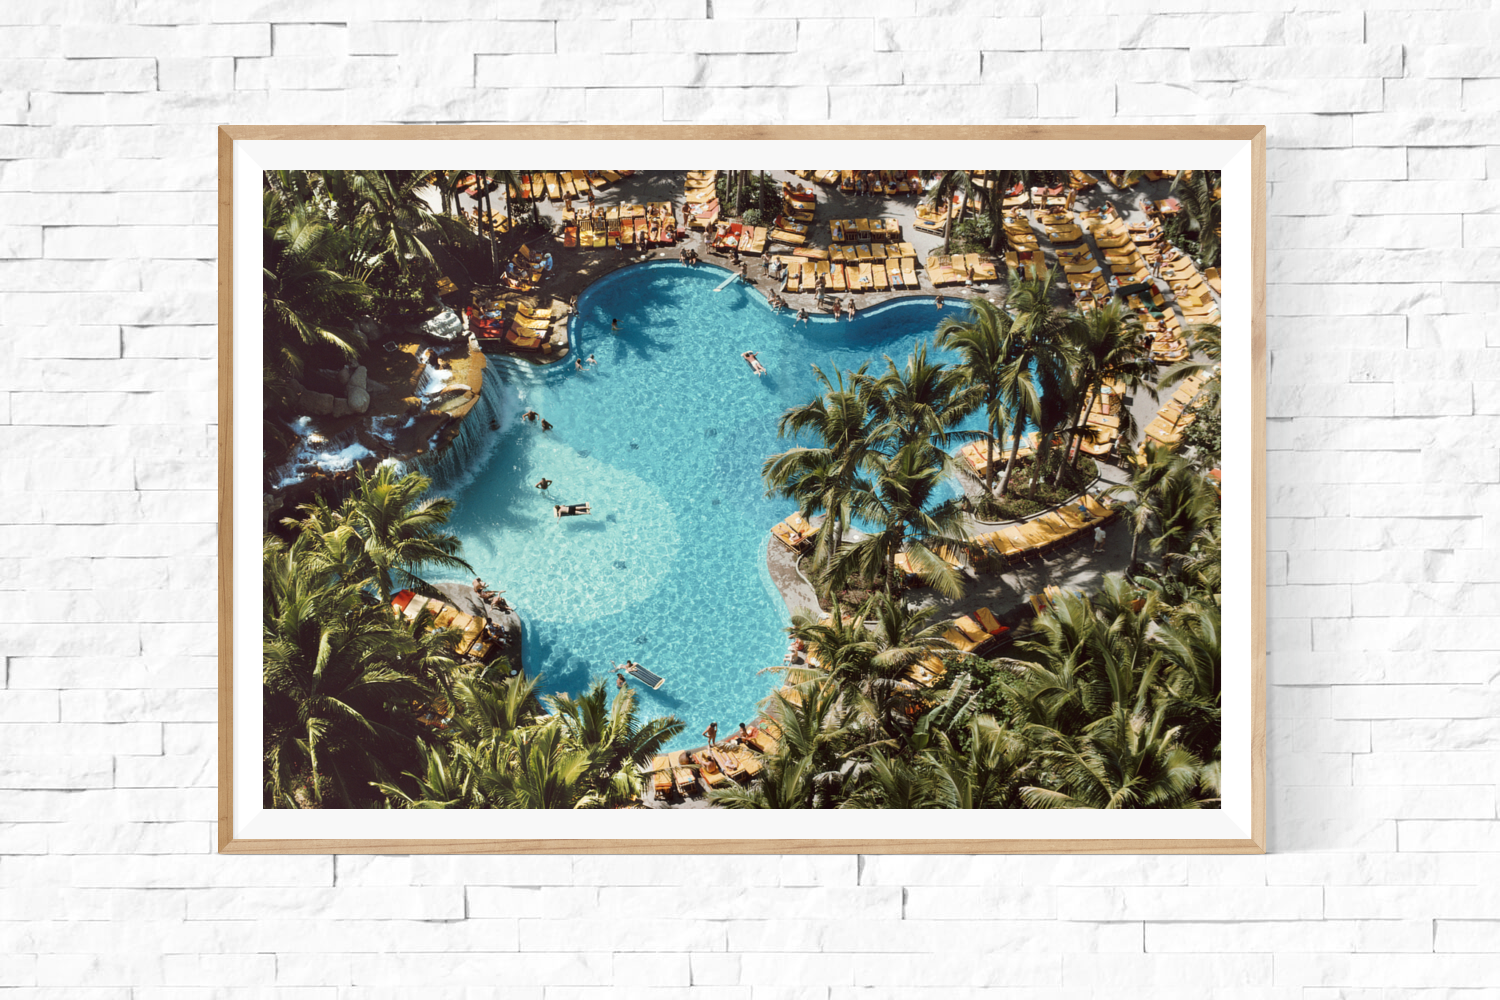 Framed Slim Aarons: Princess Hotel,Acapulco Mexico,  photo for sale Getty Images Gallery